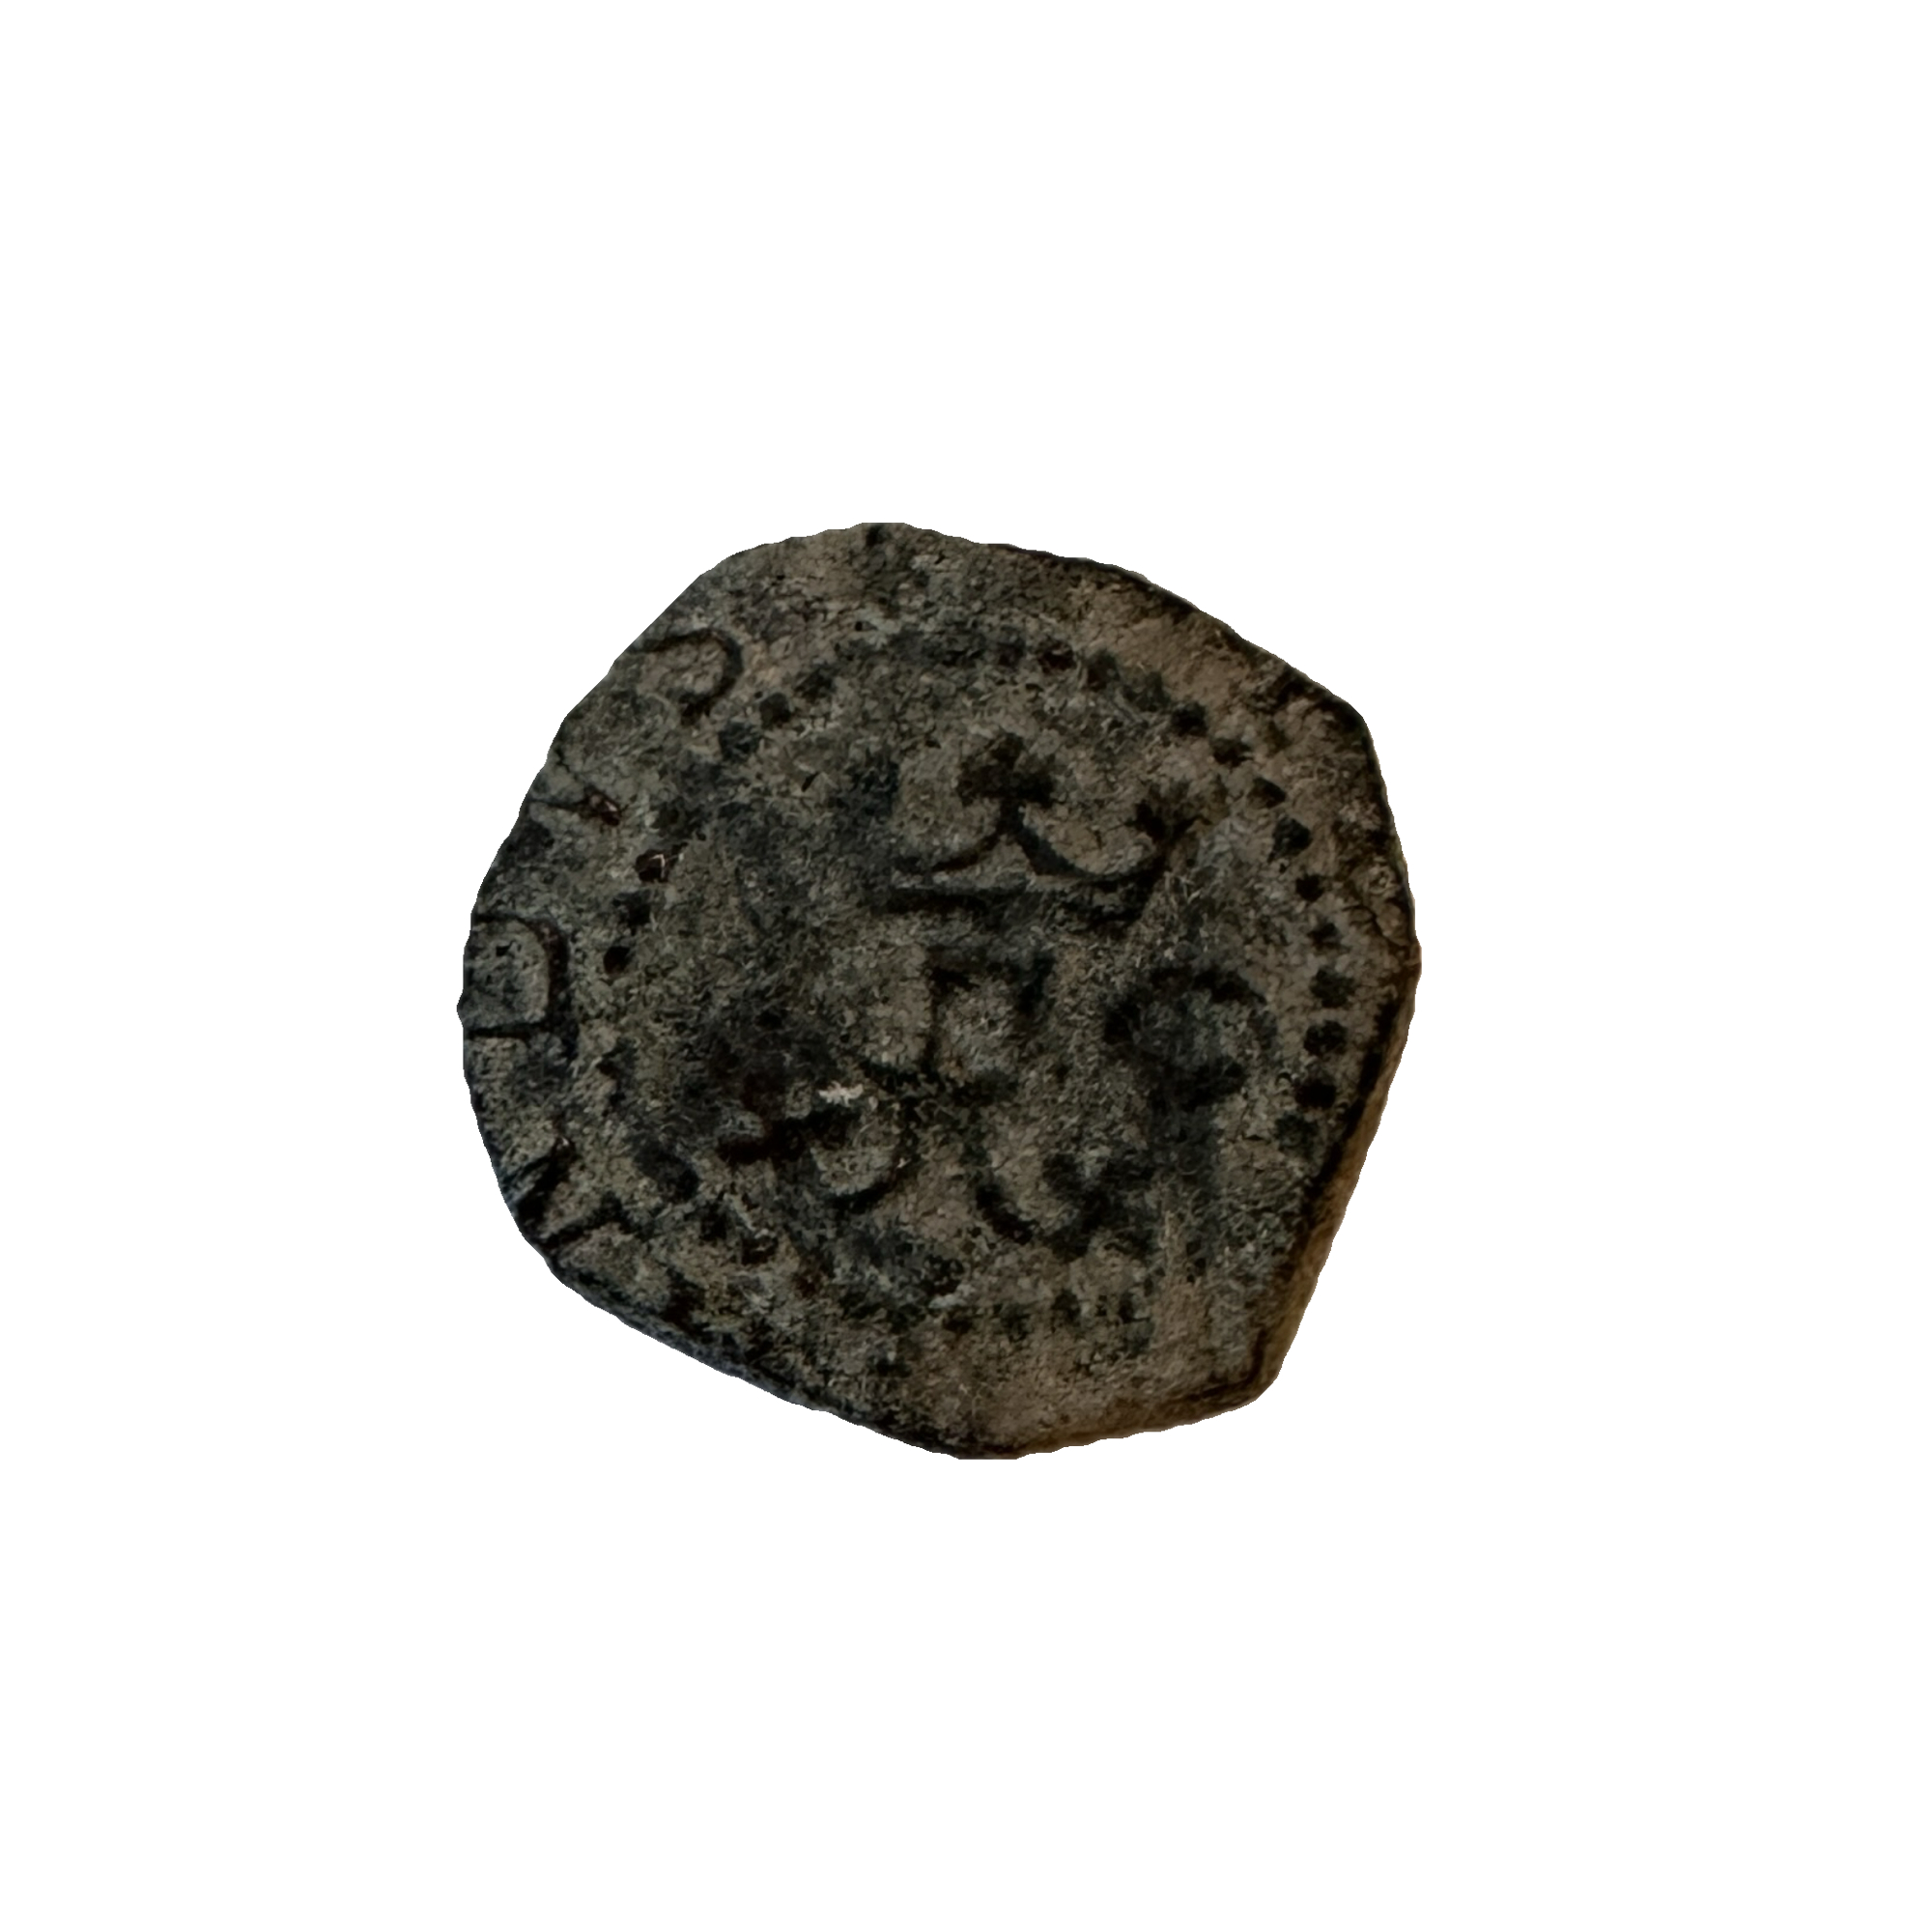 This very intricate designed Spanish pirate coin was hand hammered using bronze and was from the late 1500s to early 1600s. The Cobb measures 11 mm in diameter.